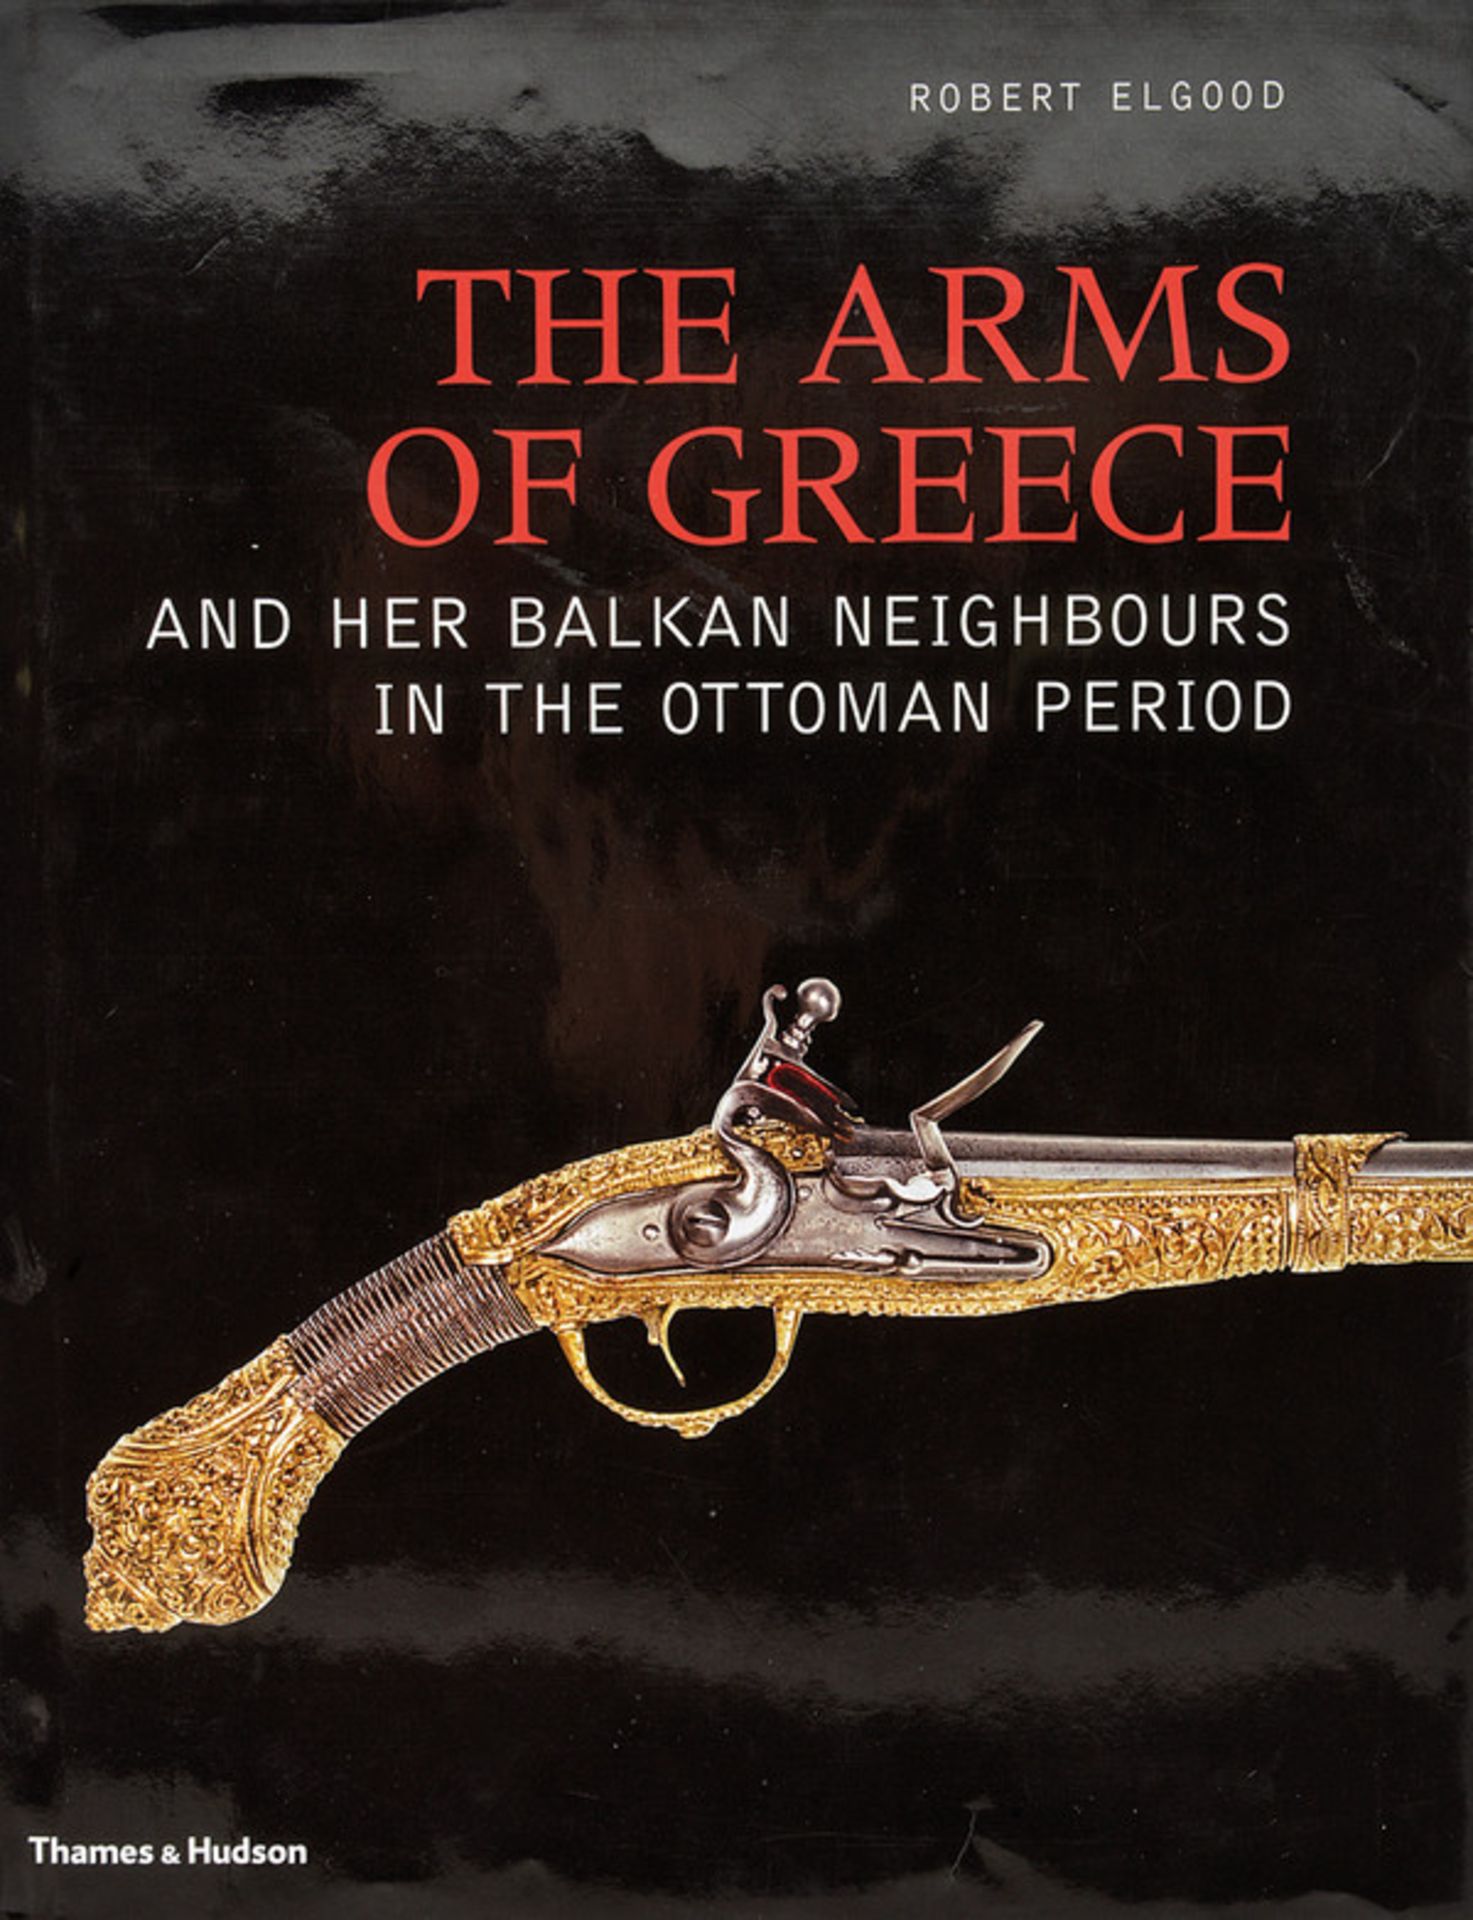 Elgood, Robert dating: first quarter of the 21th Century provenance: London "The Arms of Greece